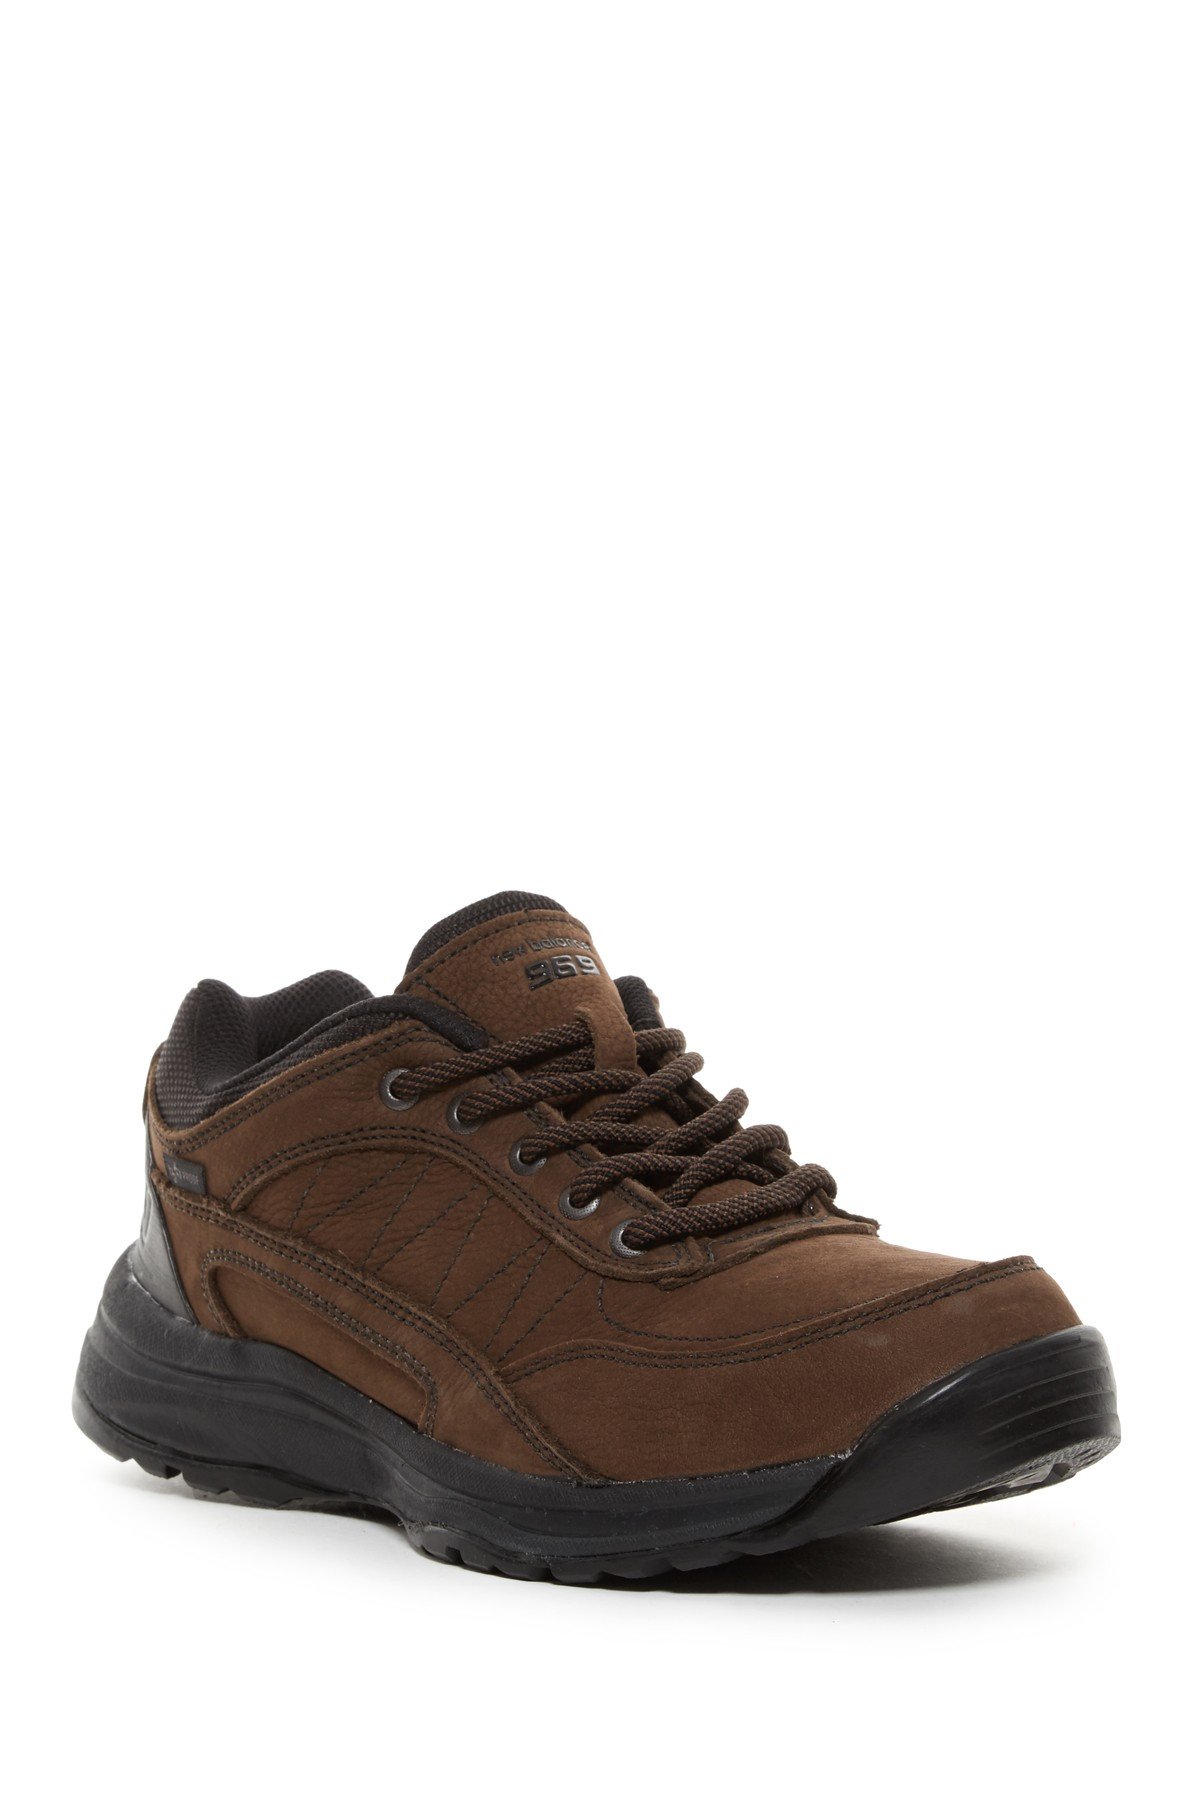 New Balance Leather 969 Walking Shoe in Brown for Men - Lyst